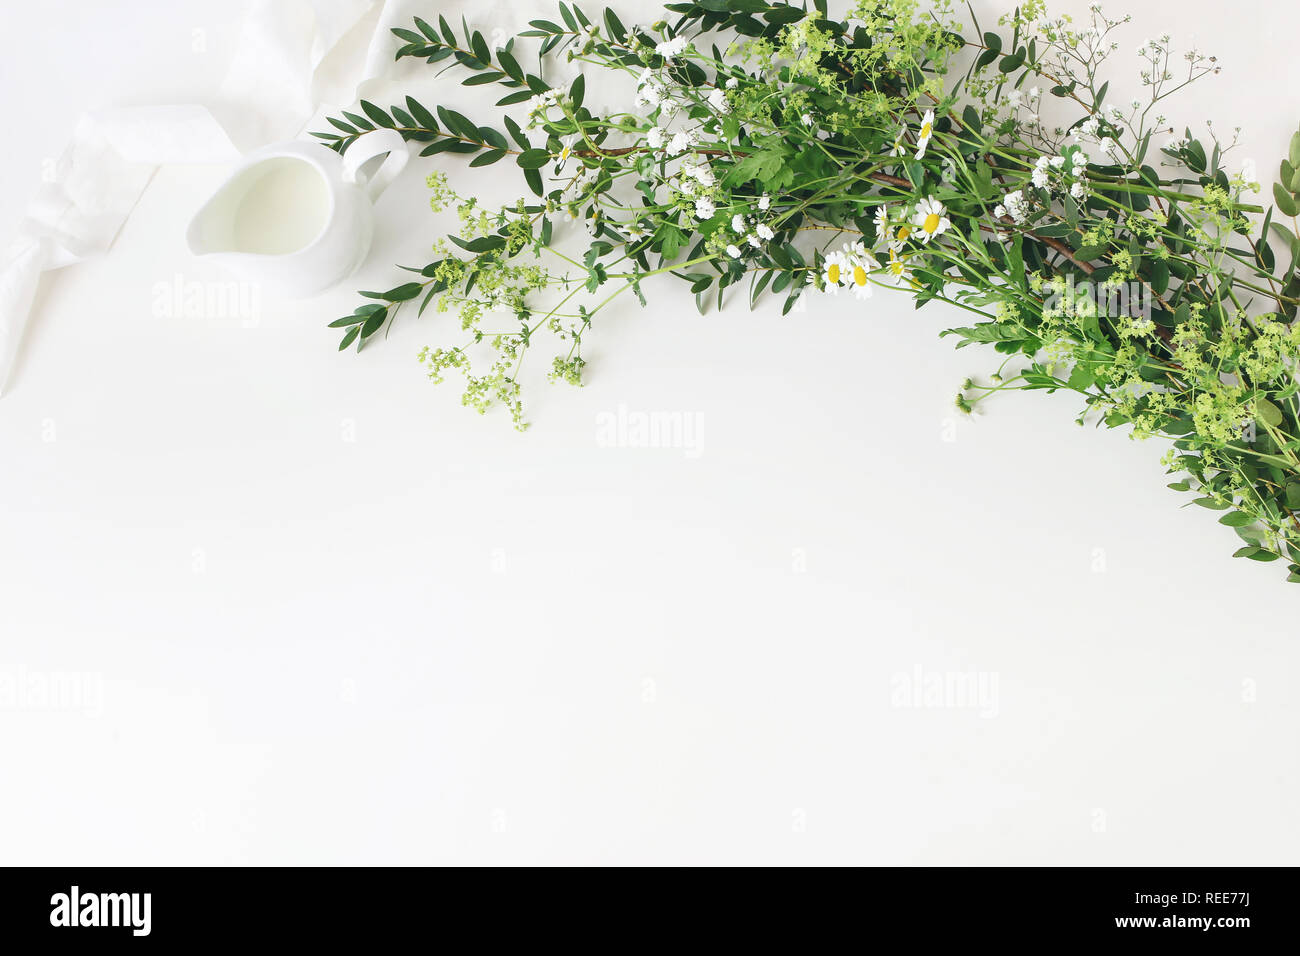 Festive wedding, birthday table scene with eucalyptus parvifolia, silk ribbon, wild meadow flowers and milk pitcher on white table background. Rustic  Stock Photo